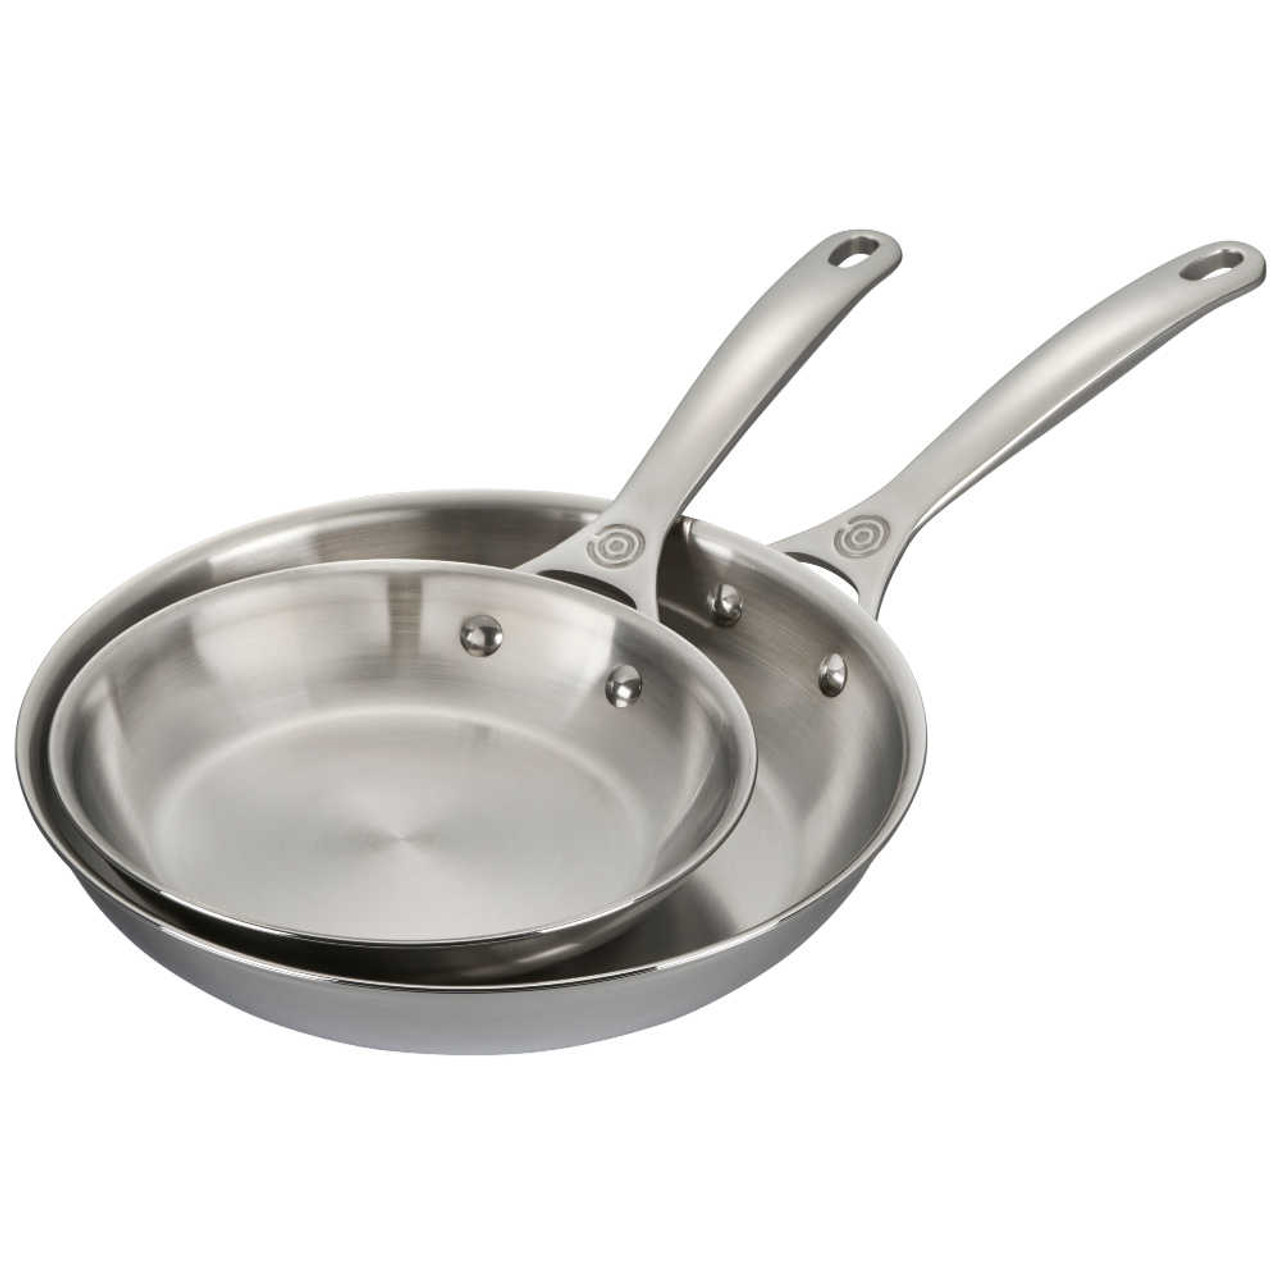 Le Creuset Tri-Ply Stainless Steel 8 Fry Pan, Small